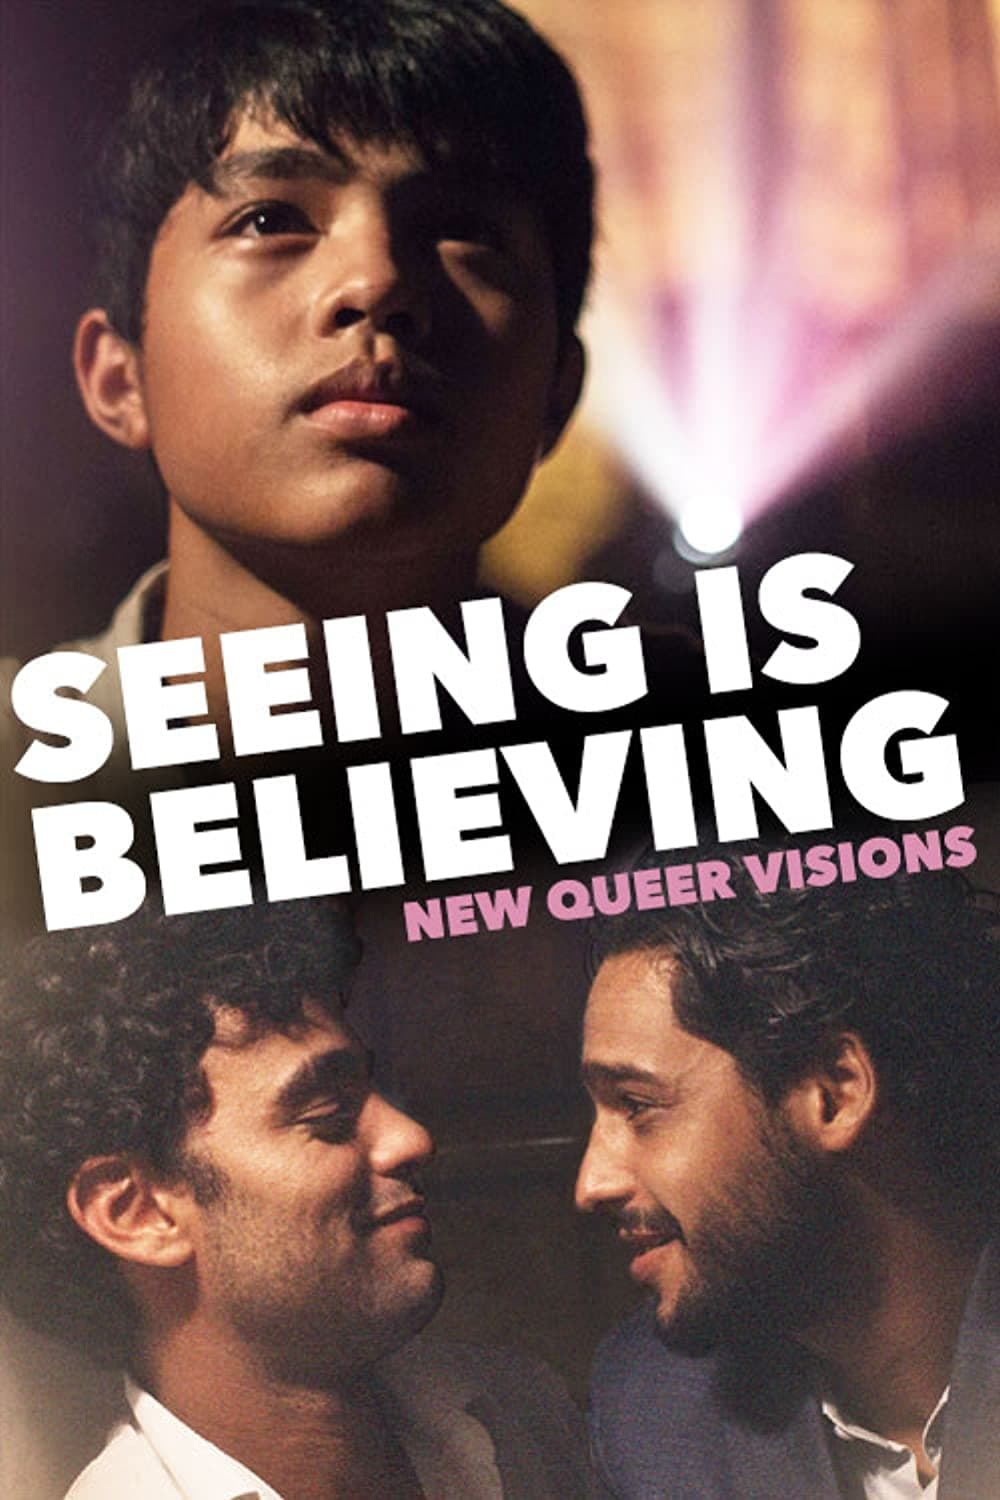 New Queer Visions: Seeing is Believing